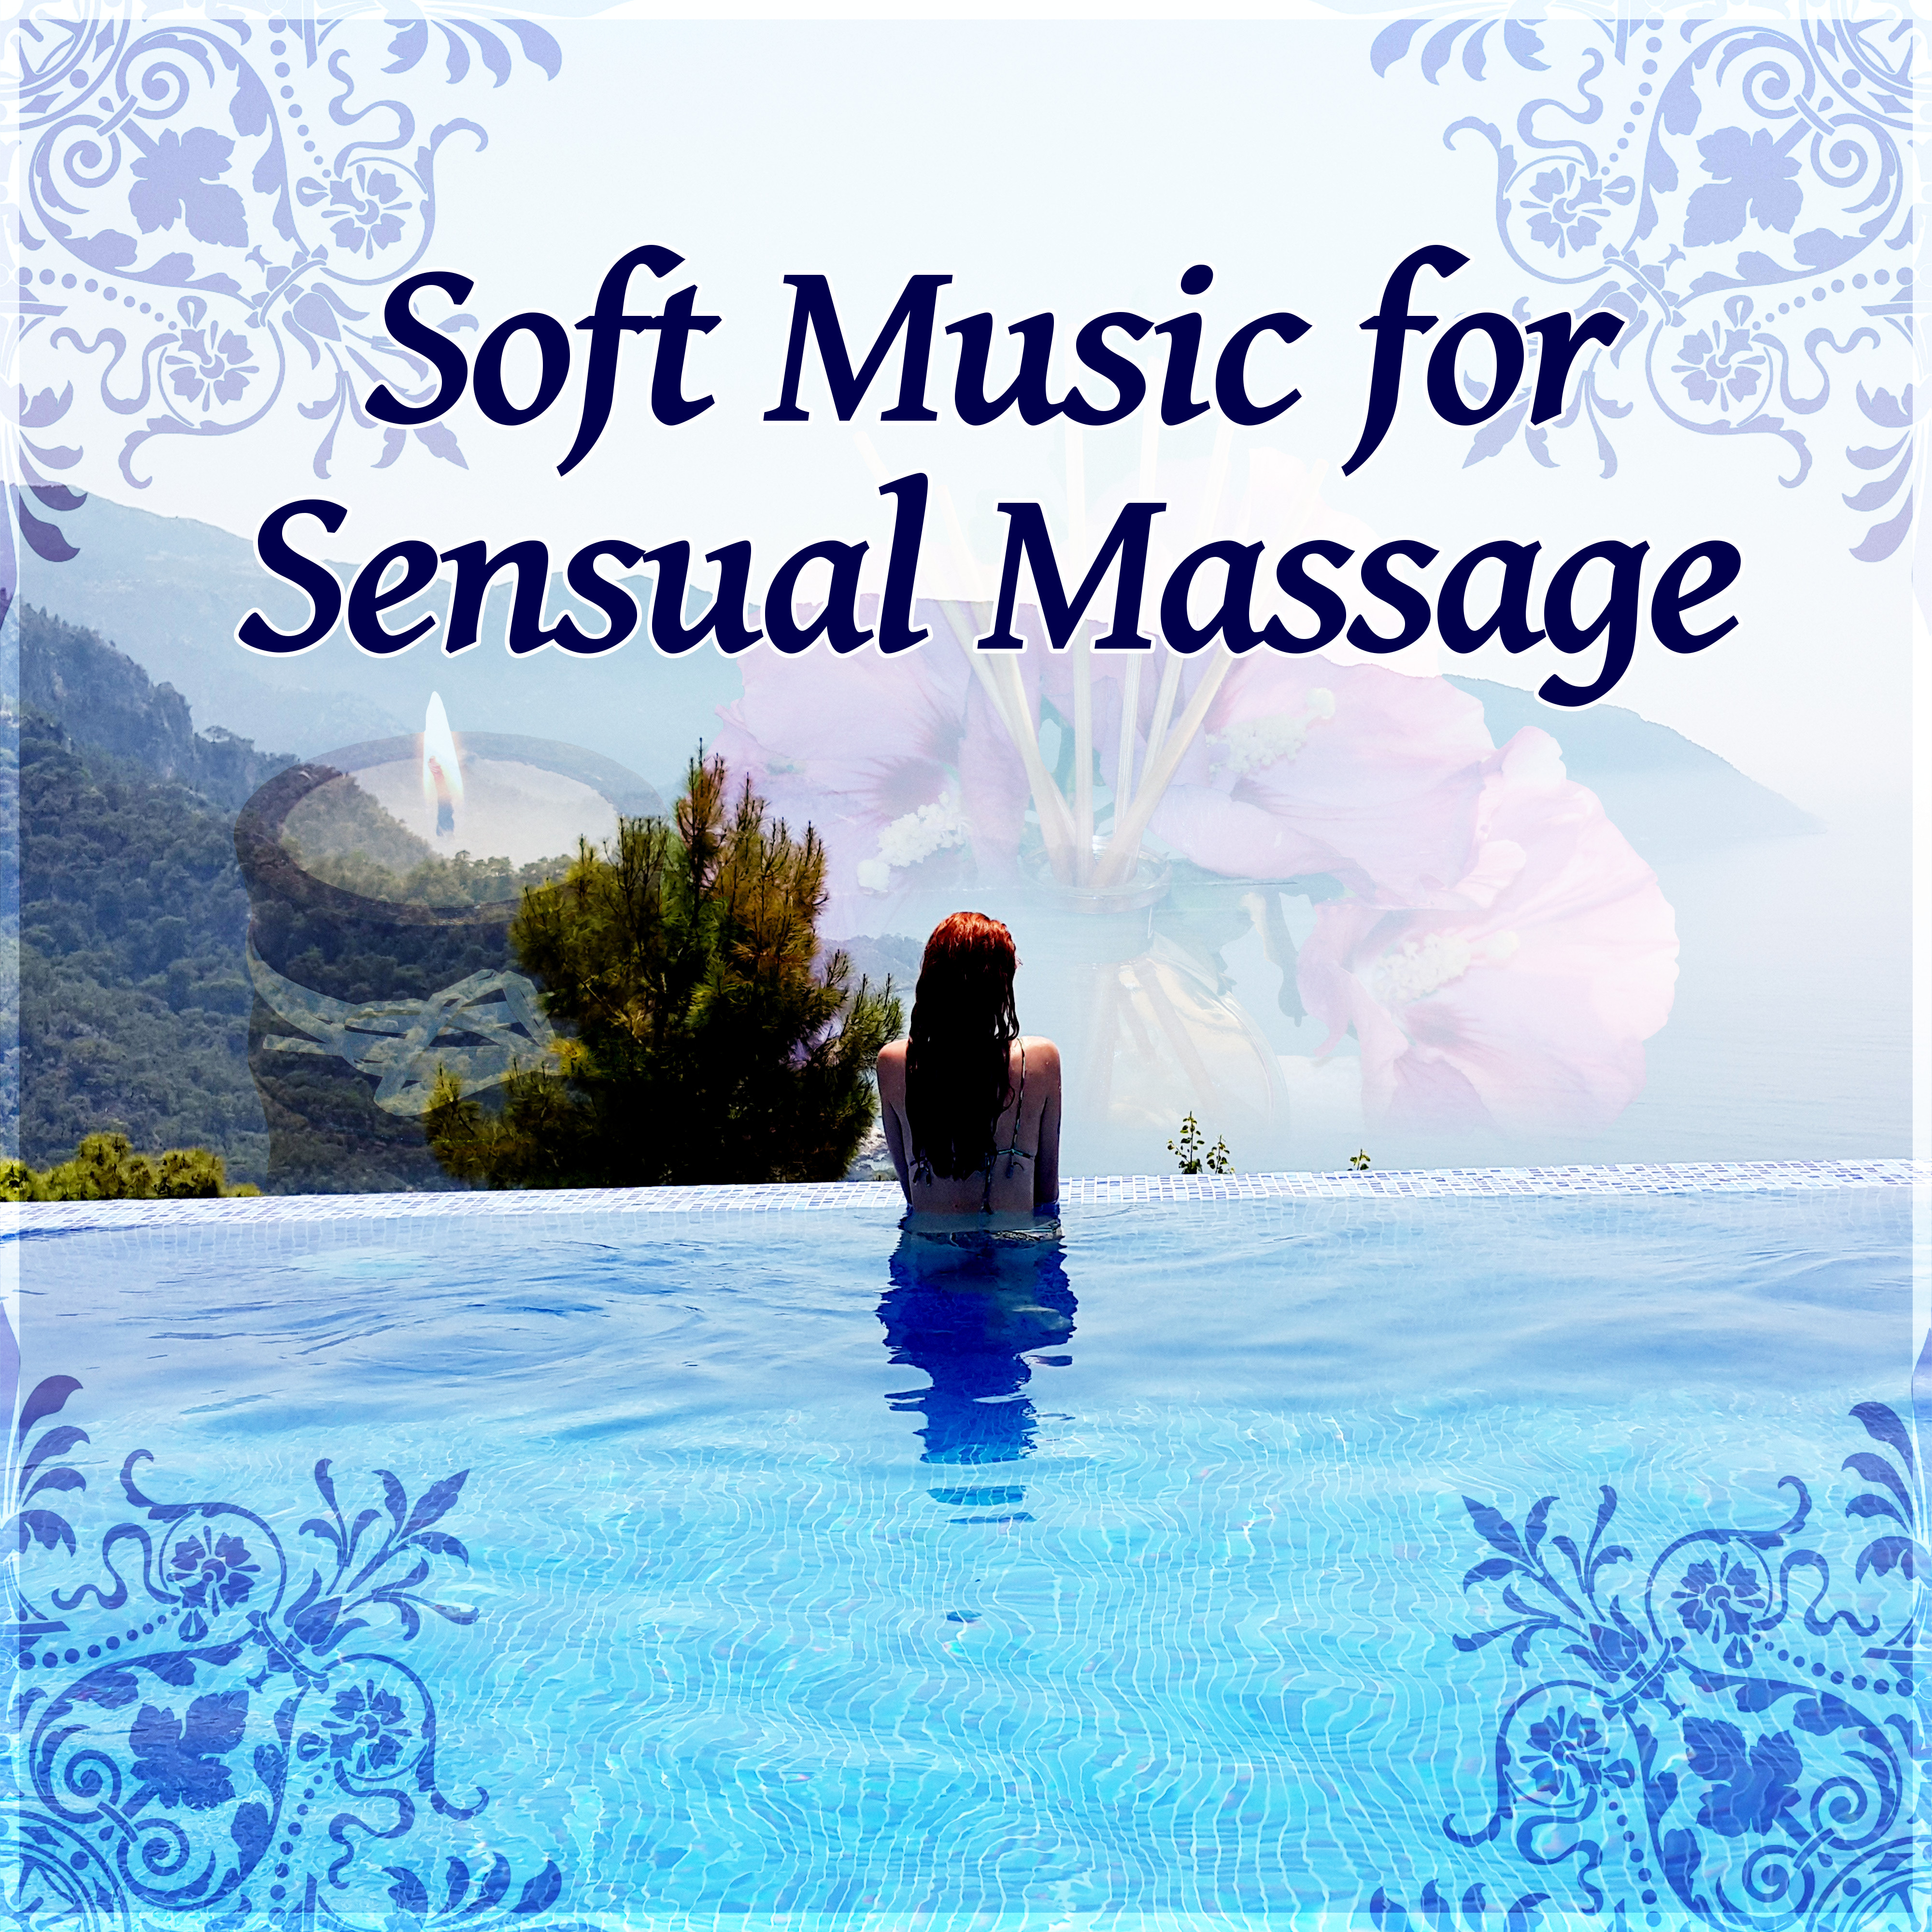 Soft Music for Sensual Massage  Deep Sounds for Relaxation, Background Music for Wellnes  Spa House, Nature Spa Music, Healing Touch